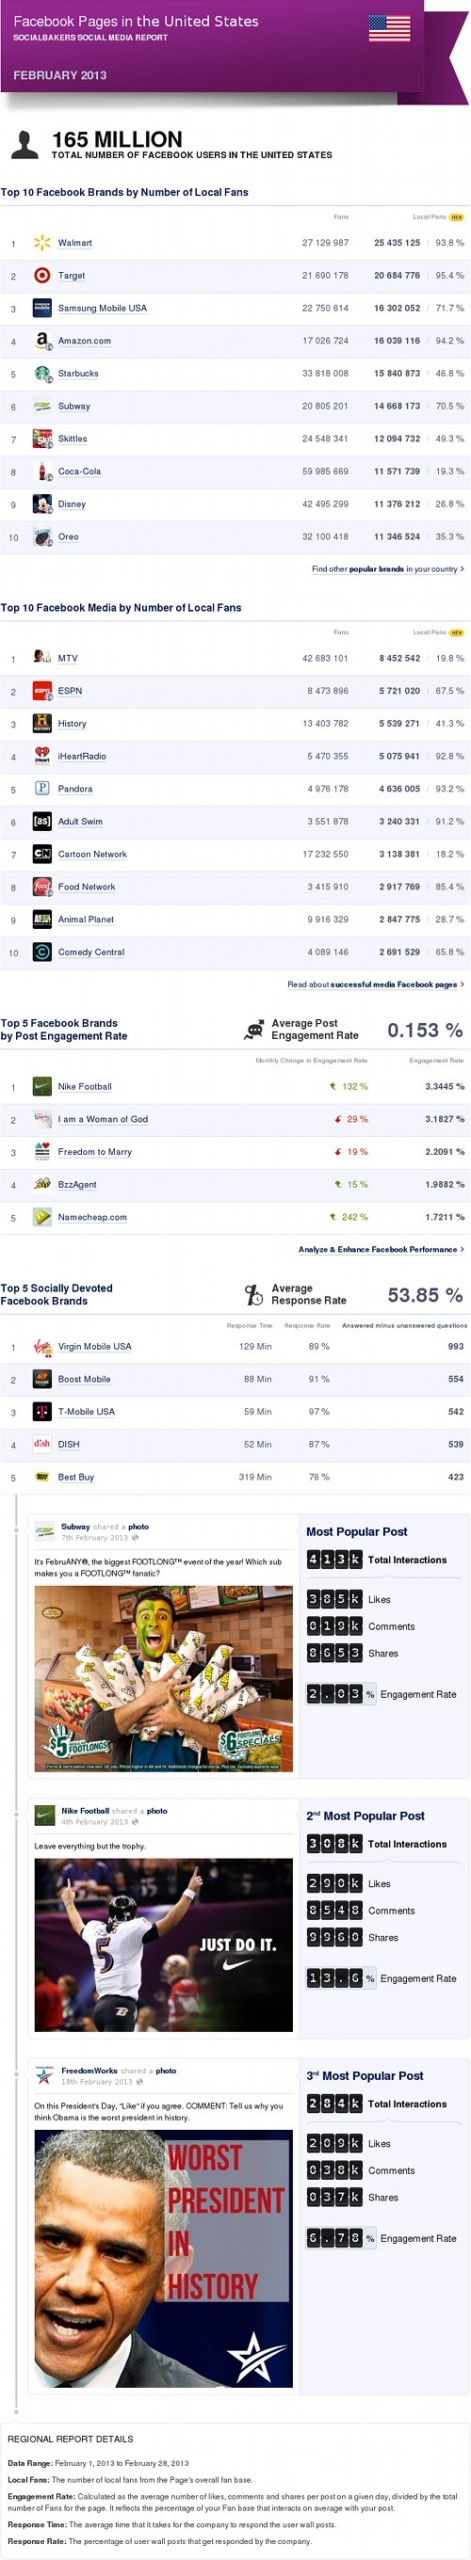 Top Facebook Pages in the US, Feb ’13